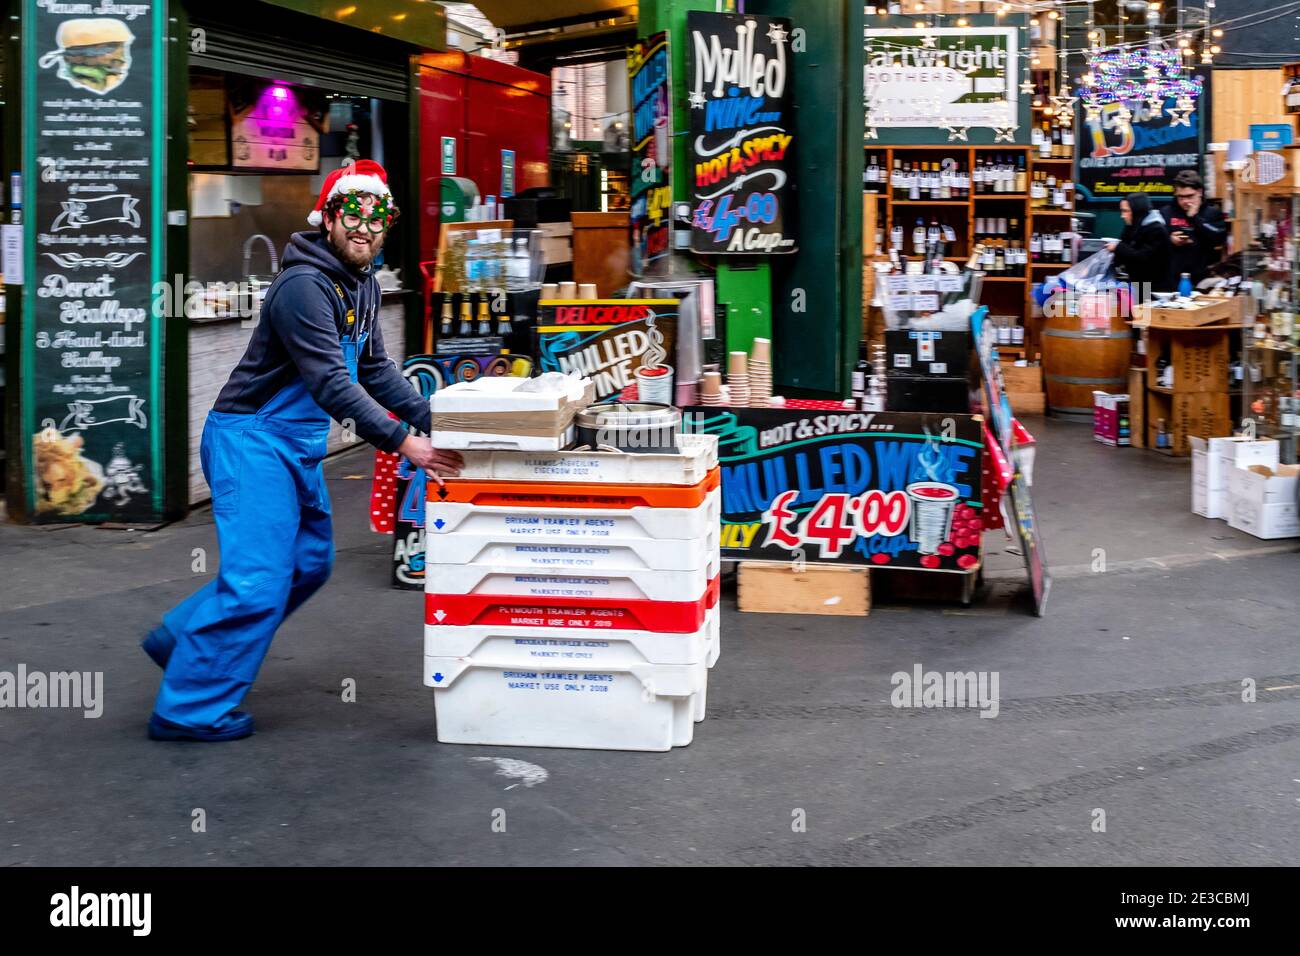 A Market Delivery Man At Christmas Time, Borough Market, London, UK. Stock Photo